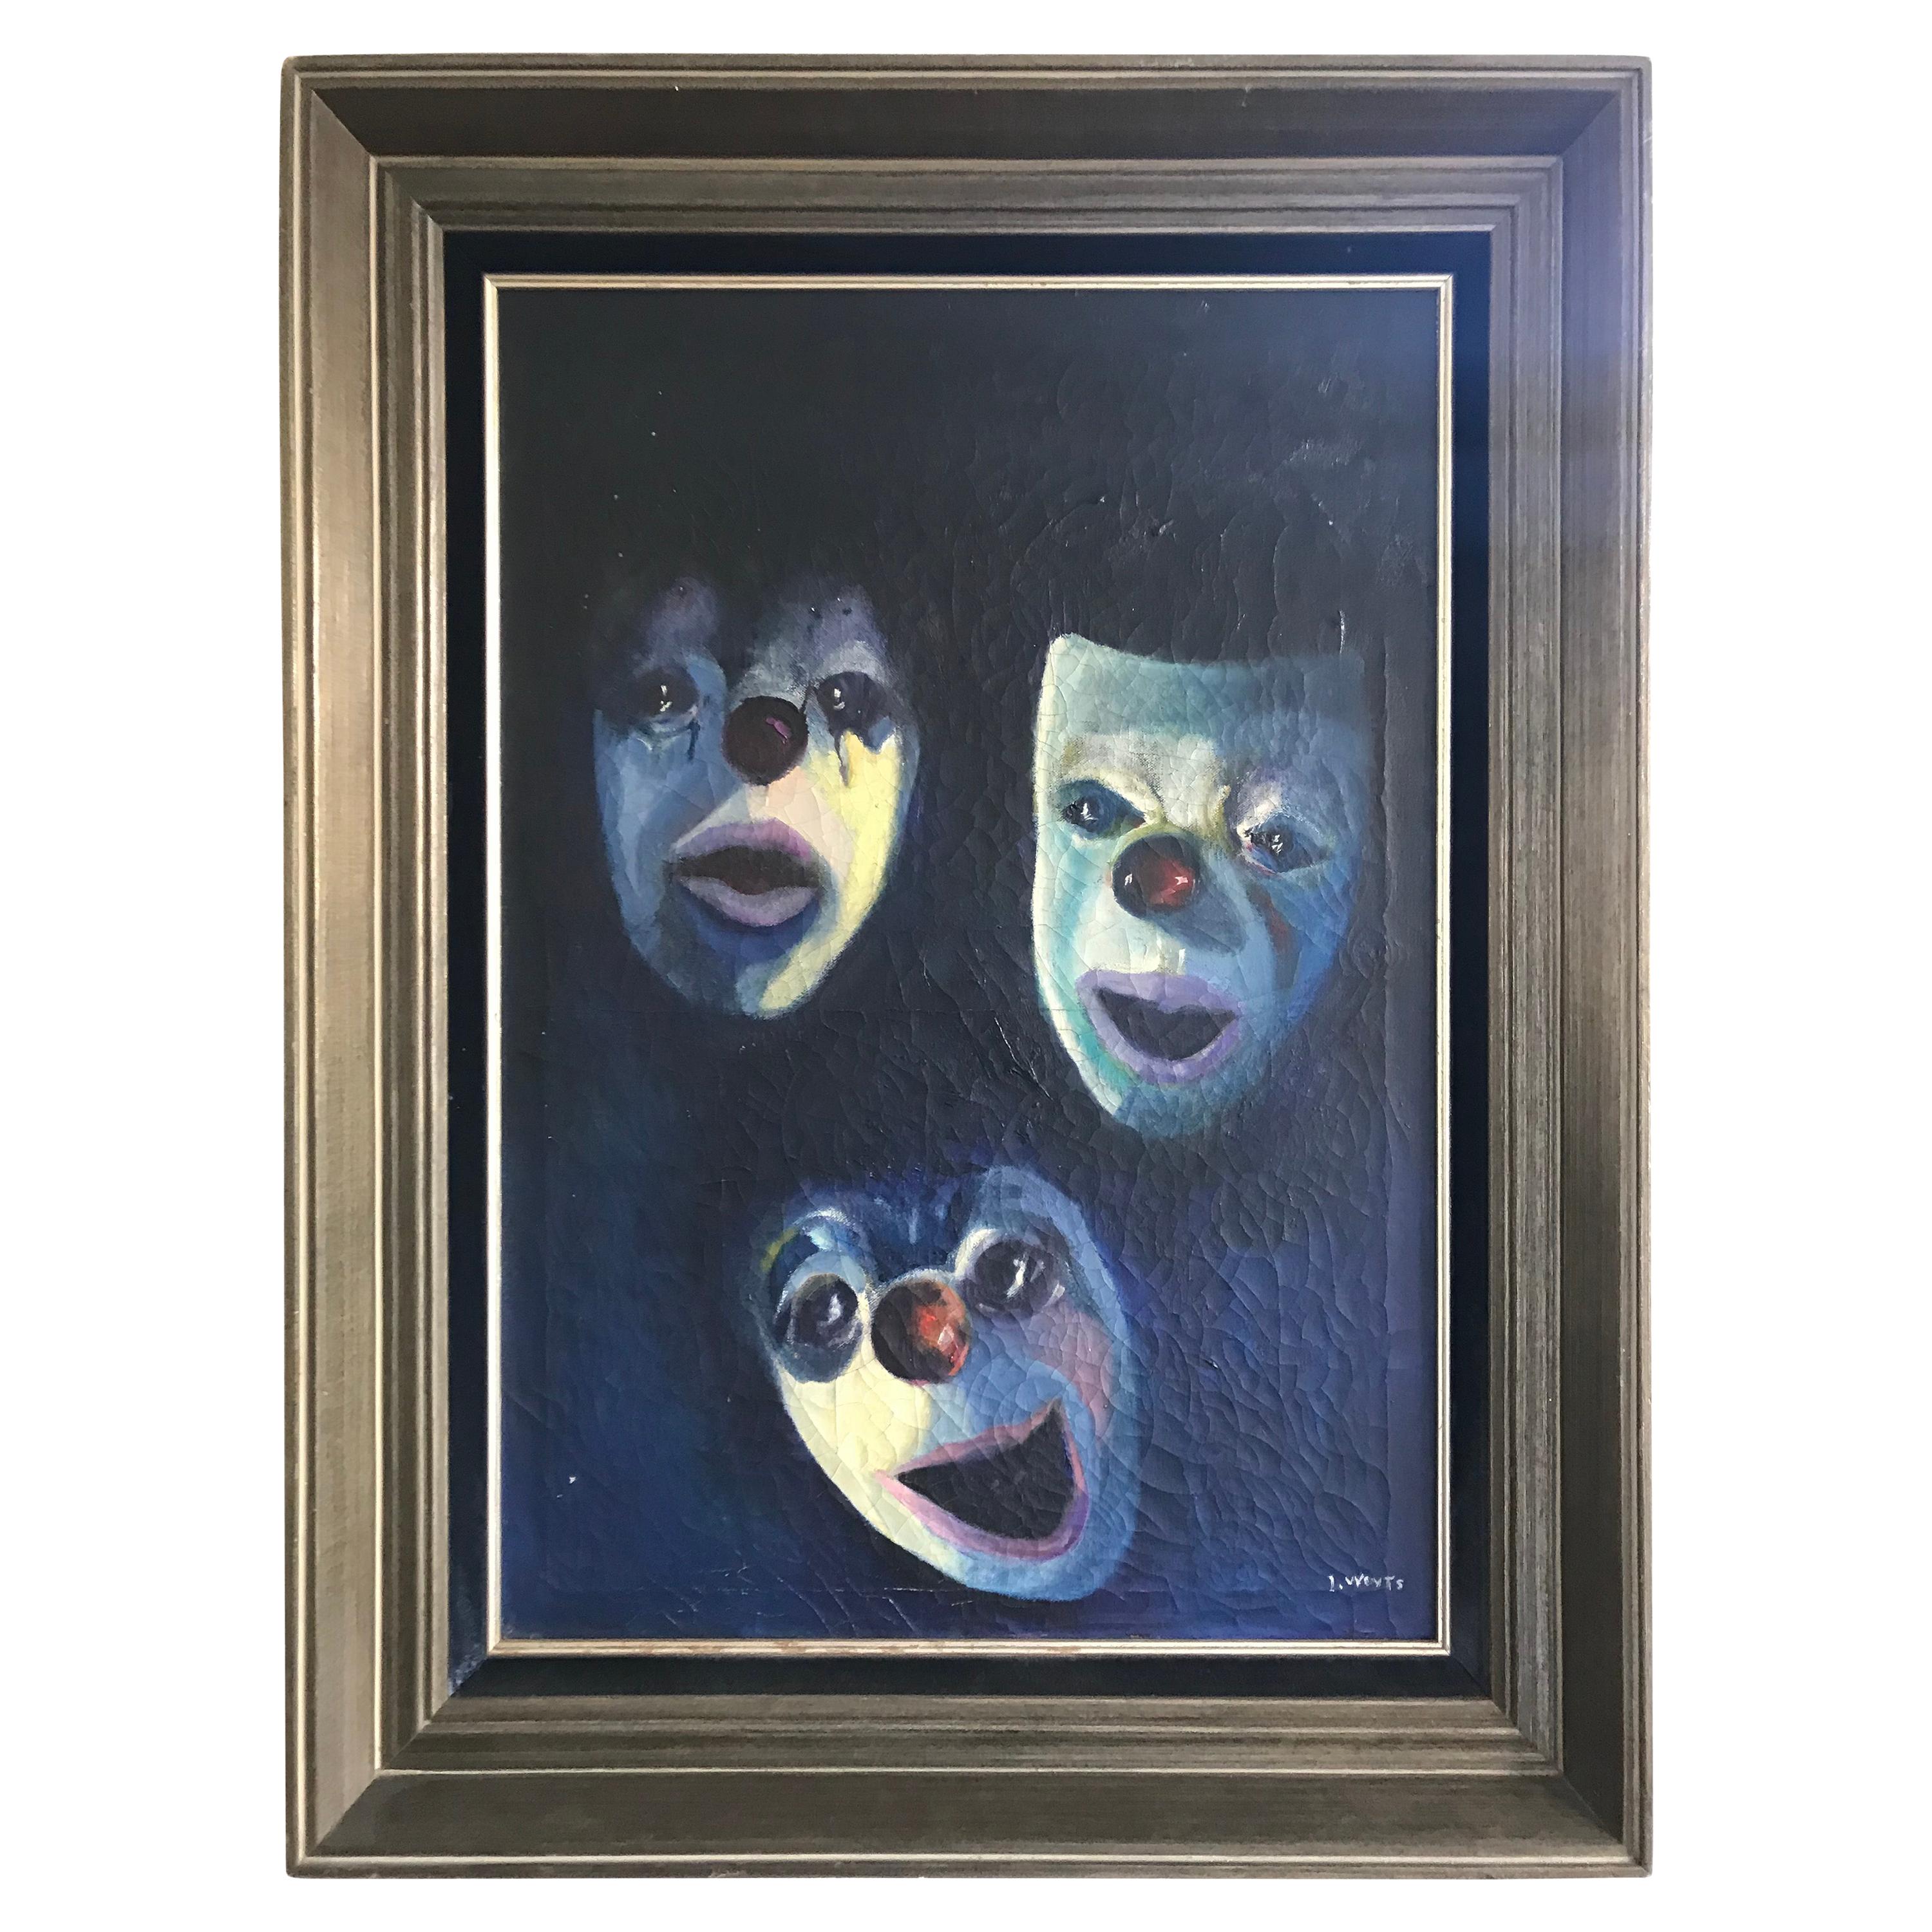 Antique Oil on Canvas Painting Showing Emotional Clown / Mime Masks by I. Weyts